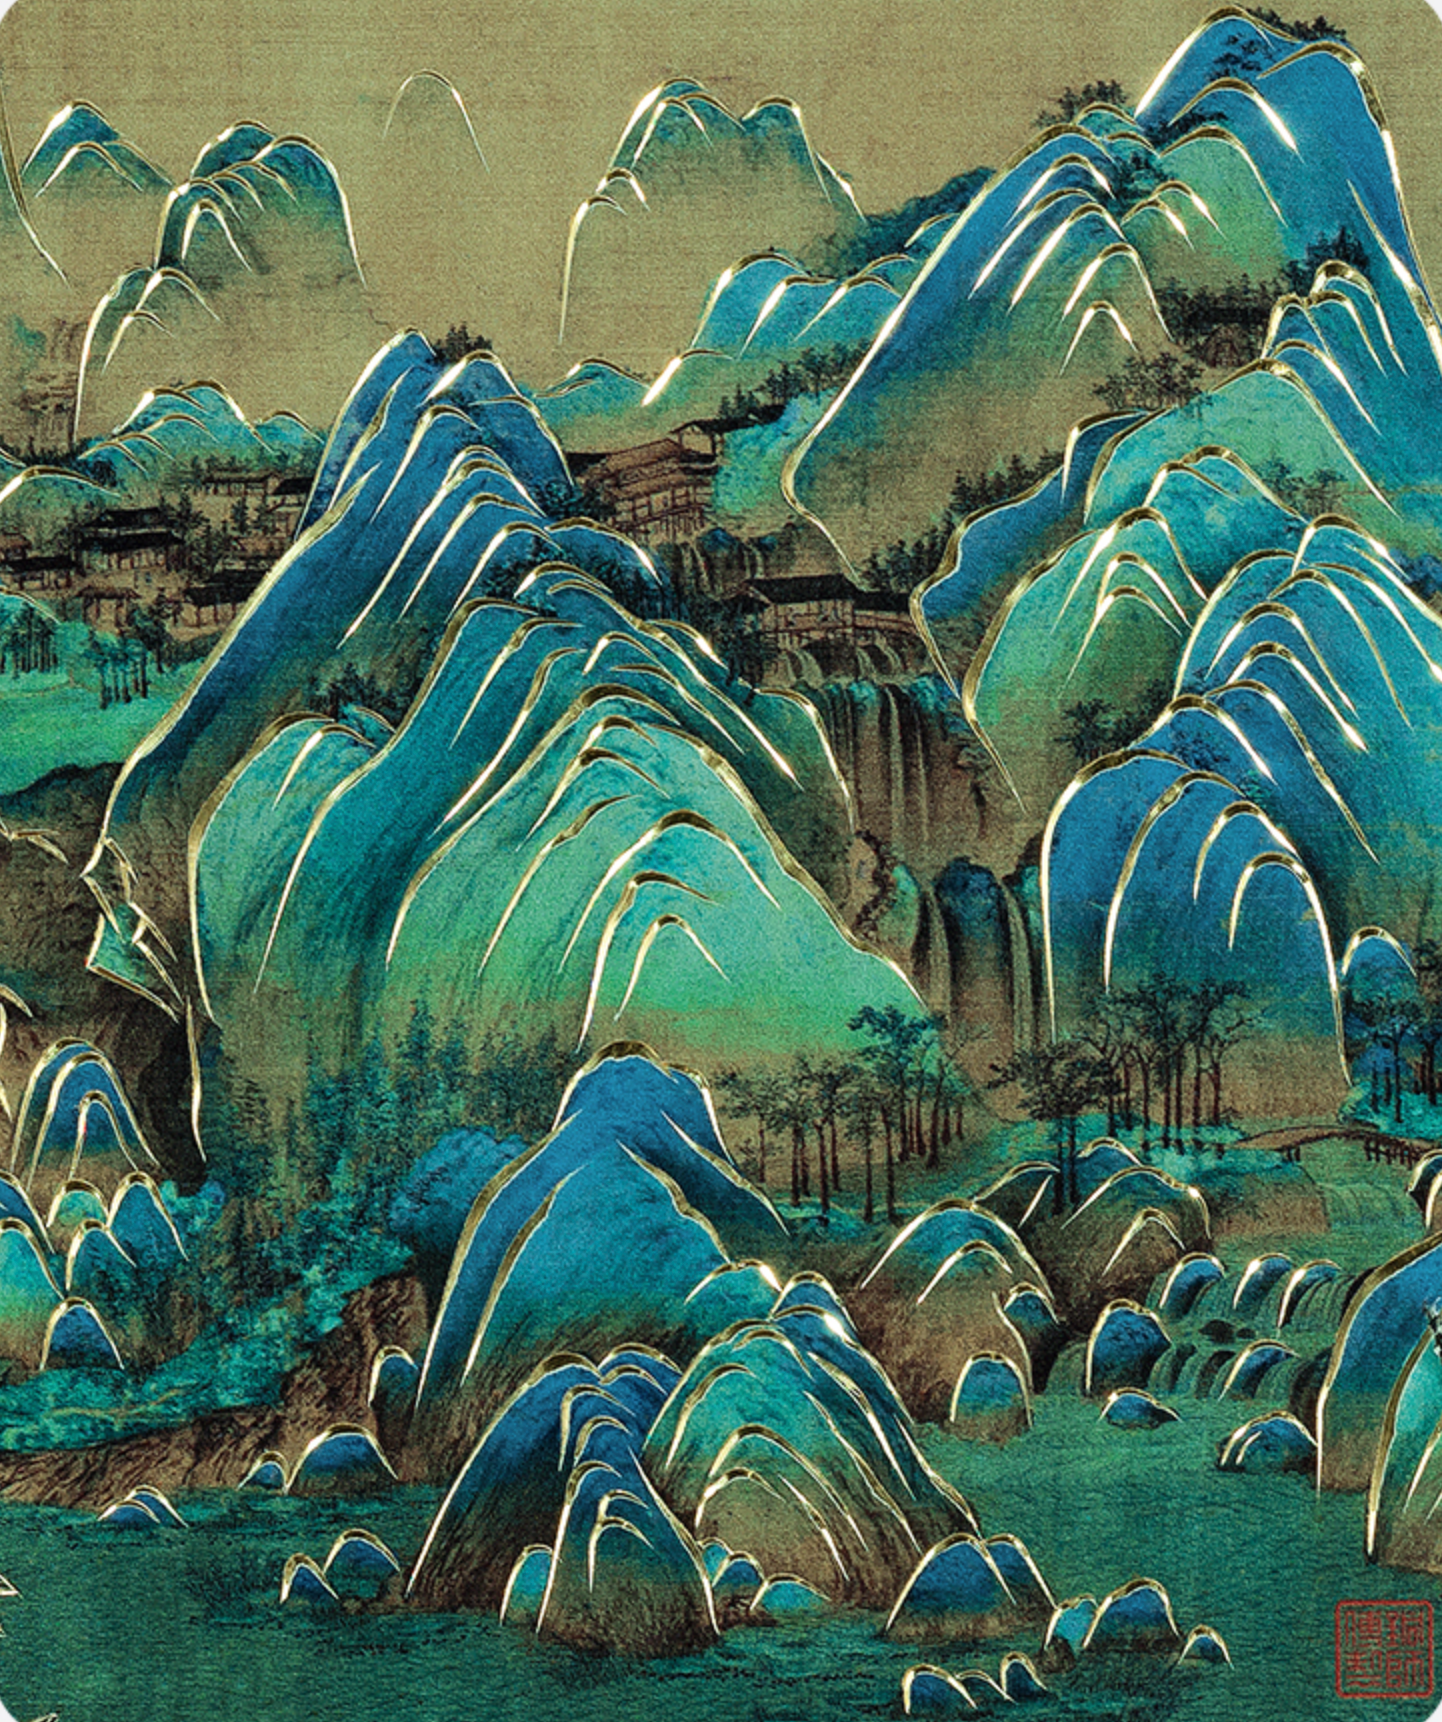 Brass Sculpture Painting(Continuous Mountain Peaks) - Morrow Land